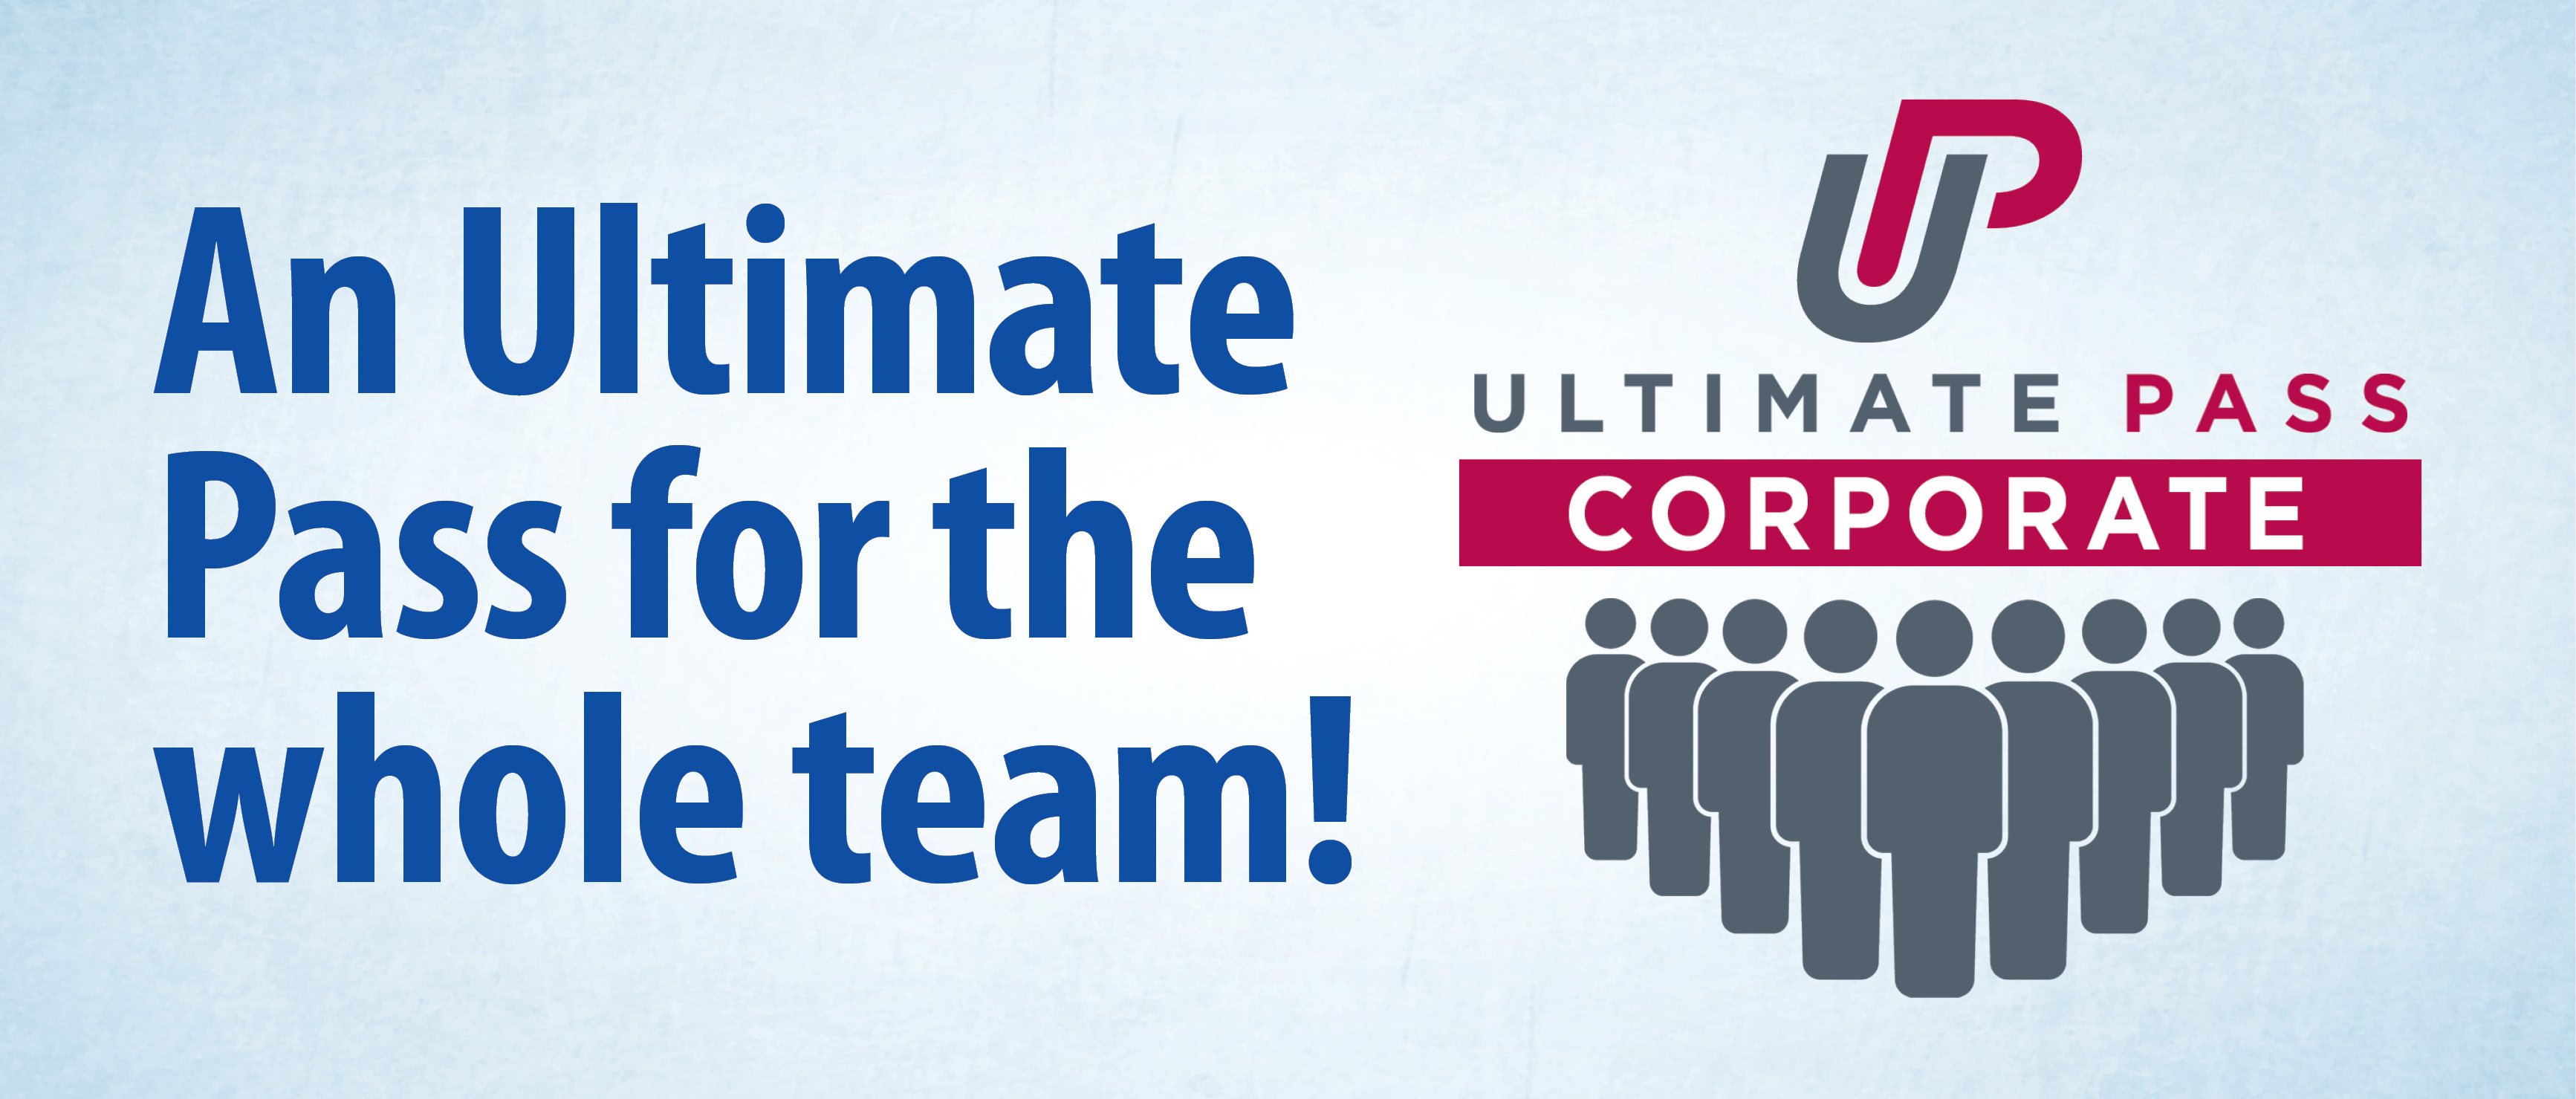 An Ultimate Pass for the whole team! ULTIMATE PASS CORPORATE